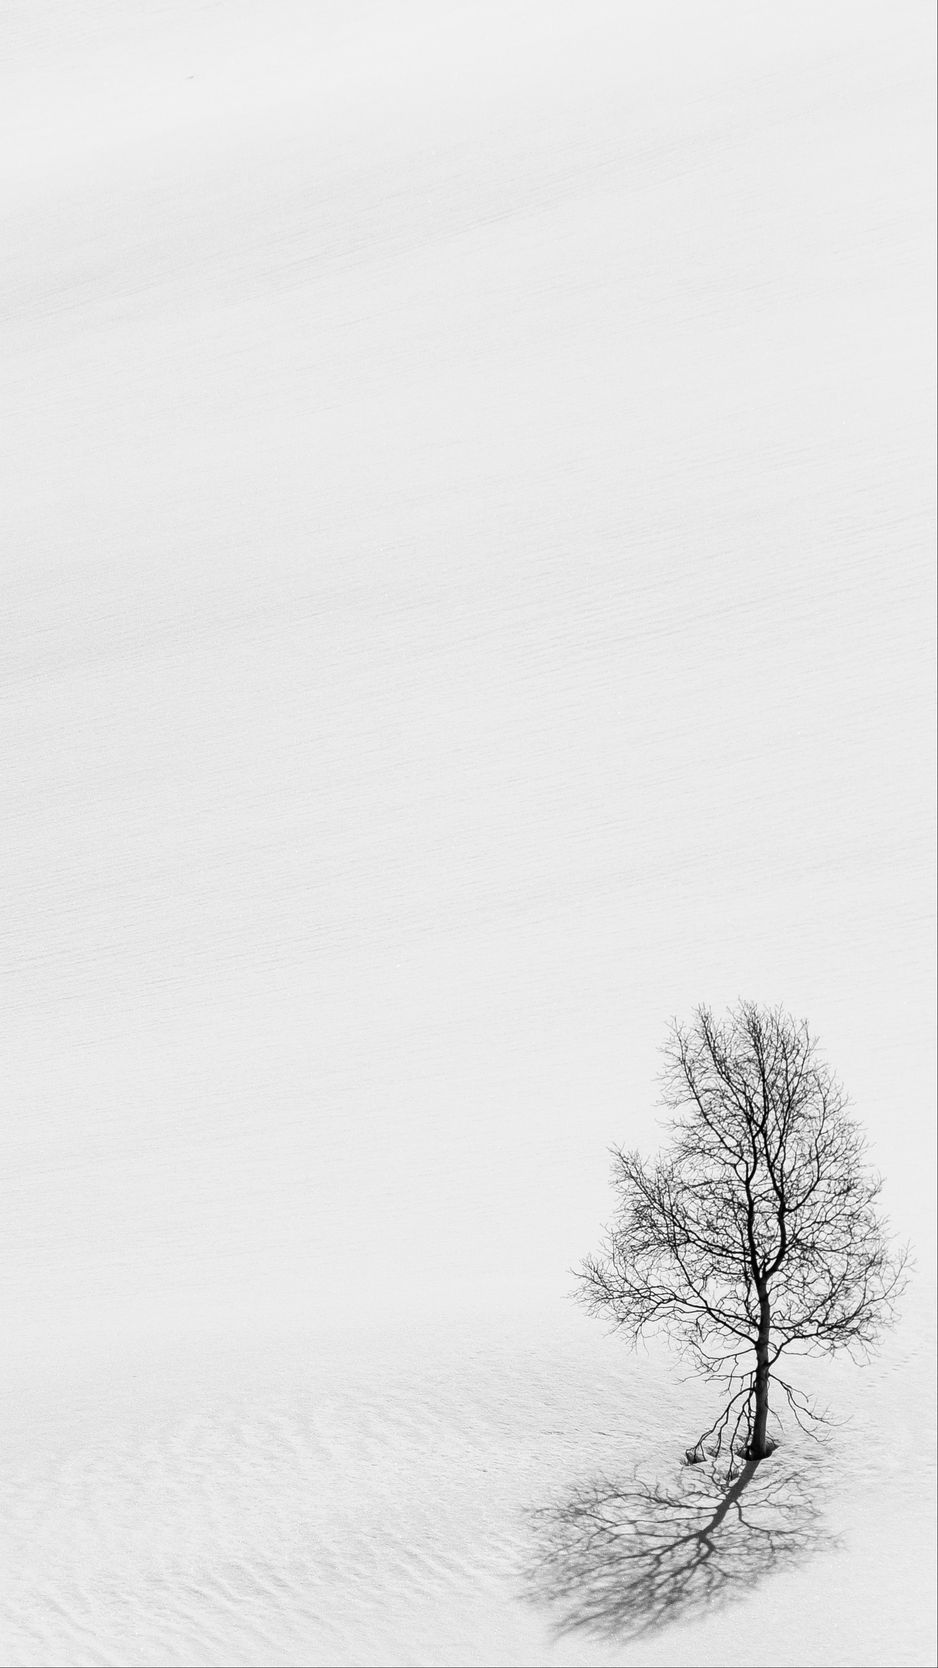 Download wallpaper 938x1668 tree snow minimalism bw winter iphone  876s6 for parallax hd background